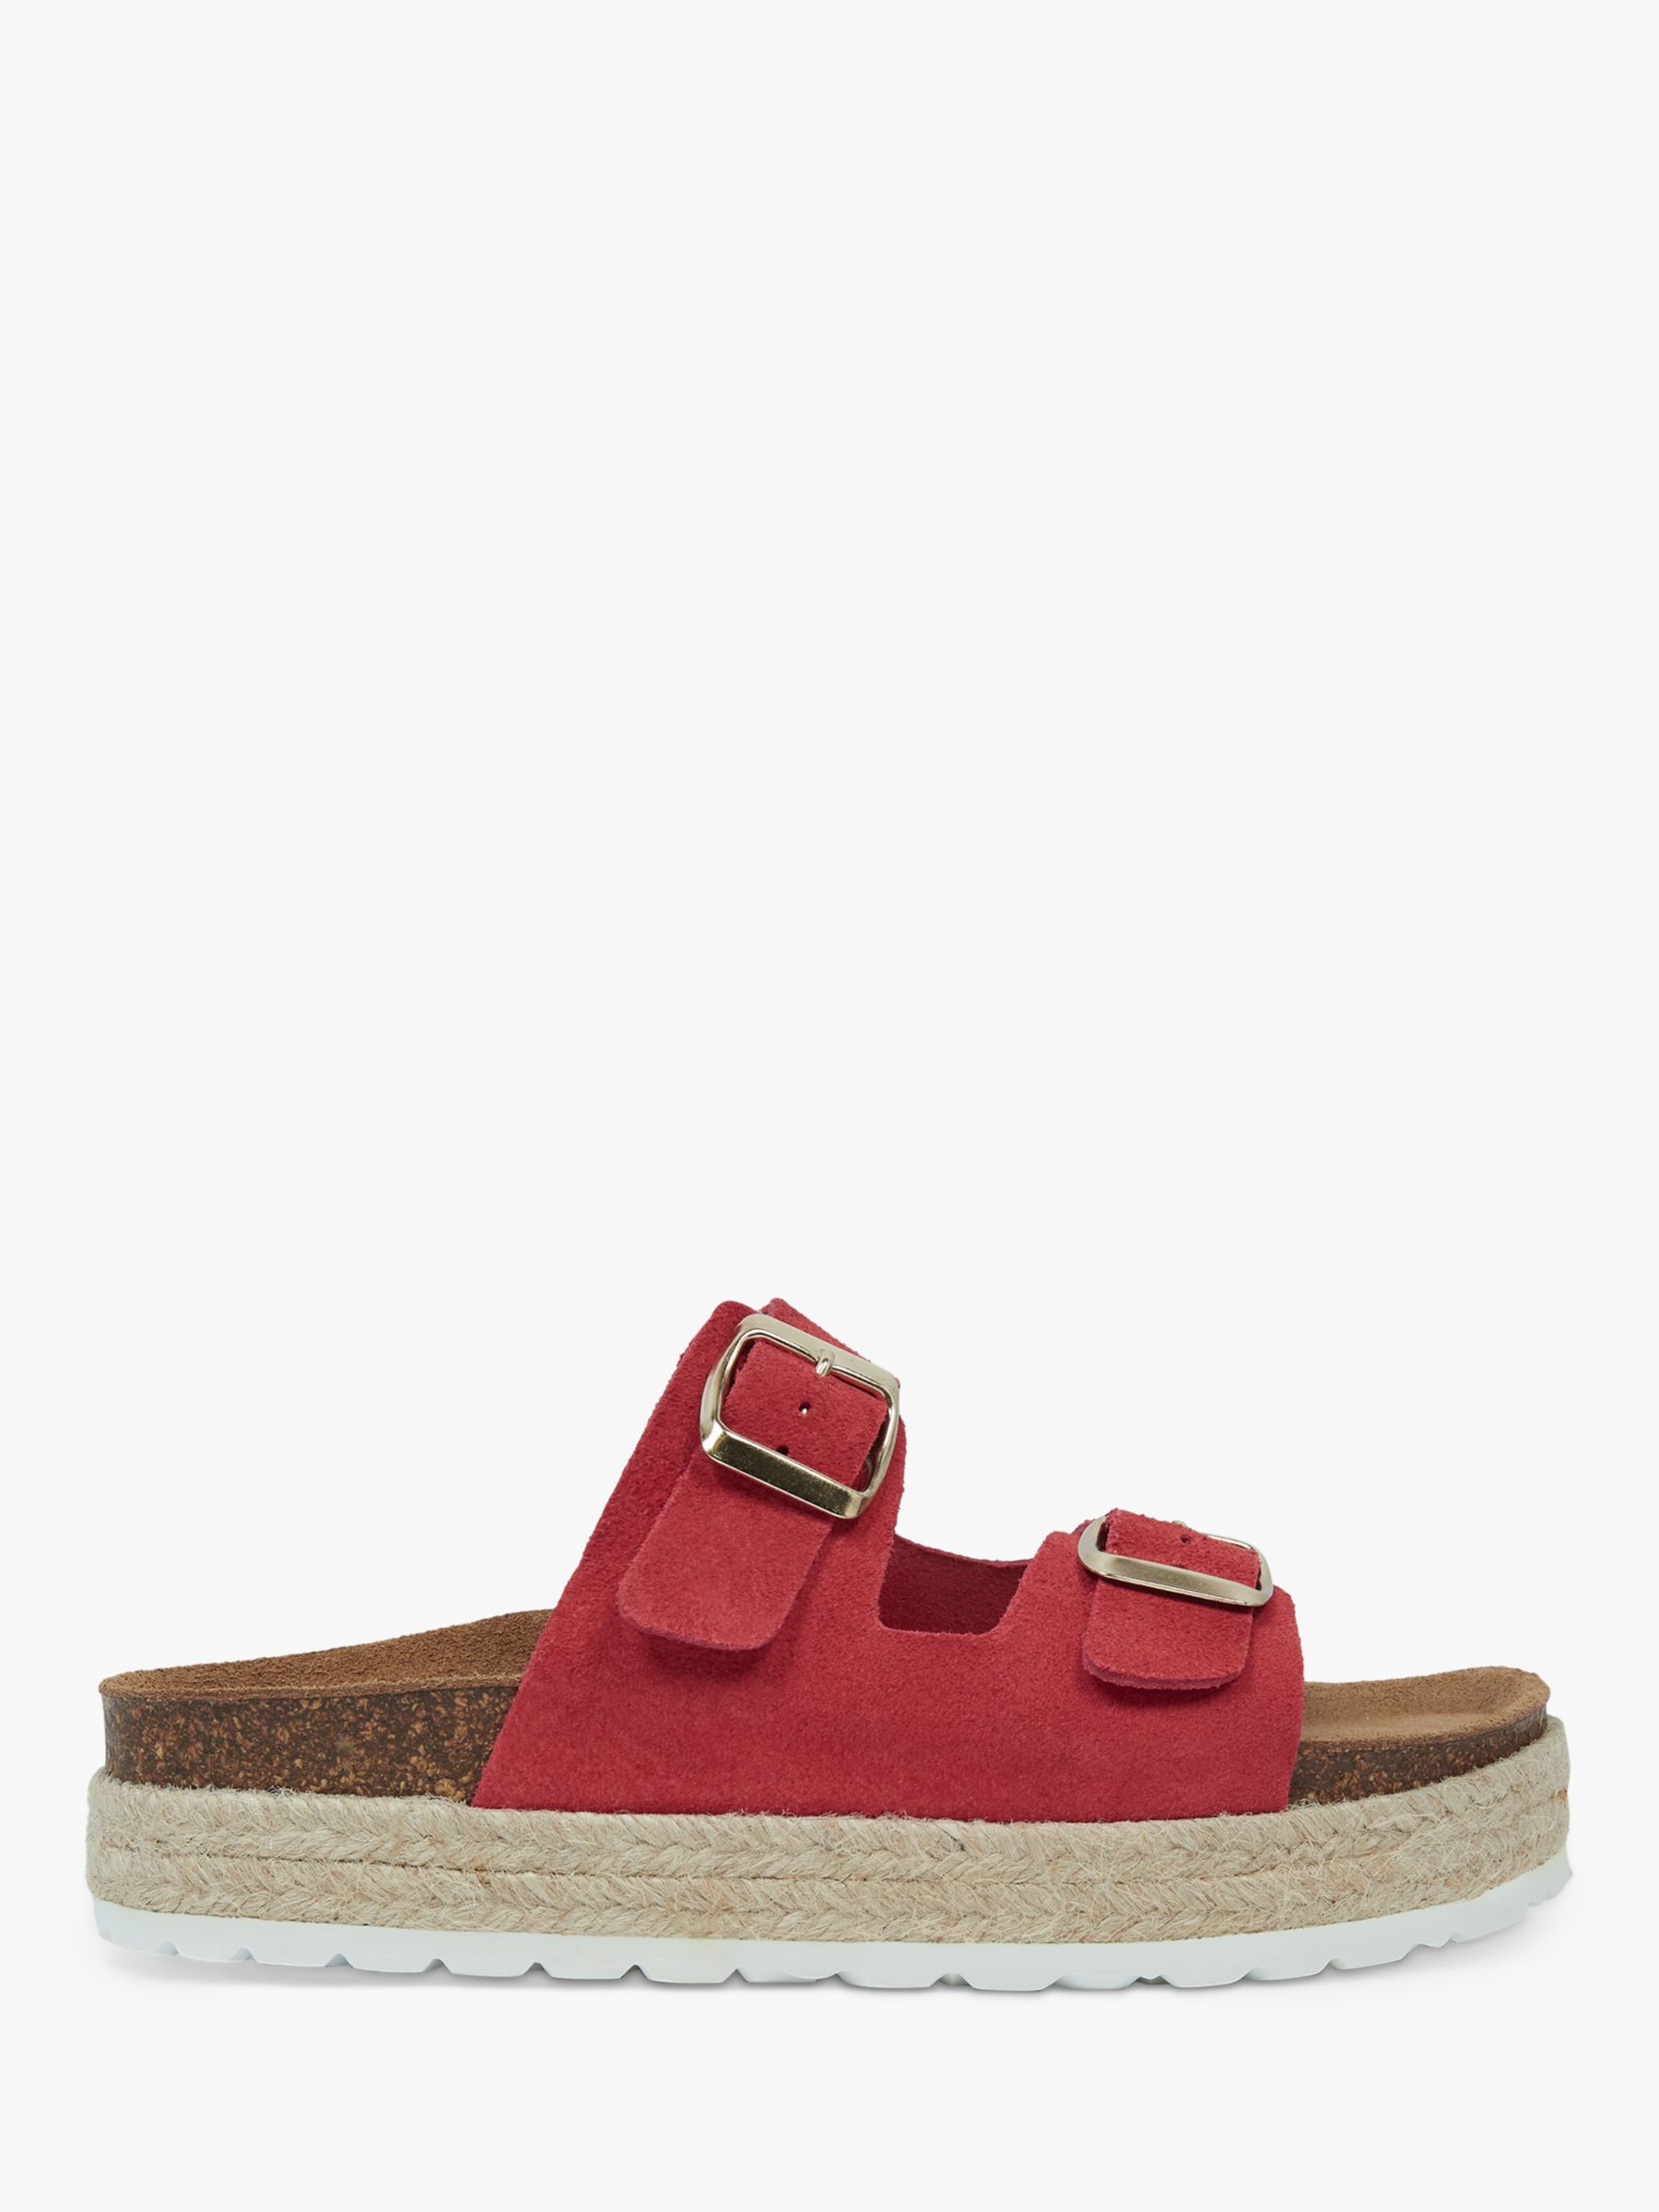 Celtic & Co. Double Buckle Suede Sliders, Chilli at John Lewis & Partners